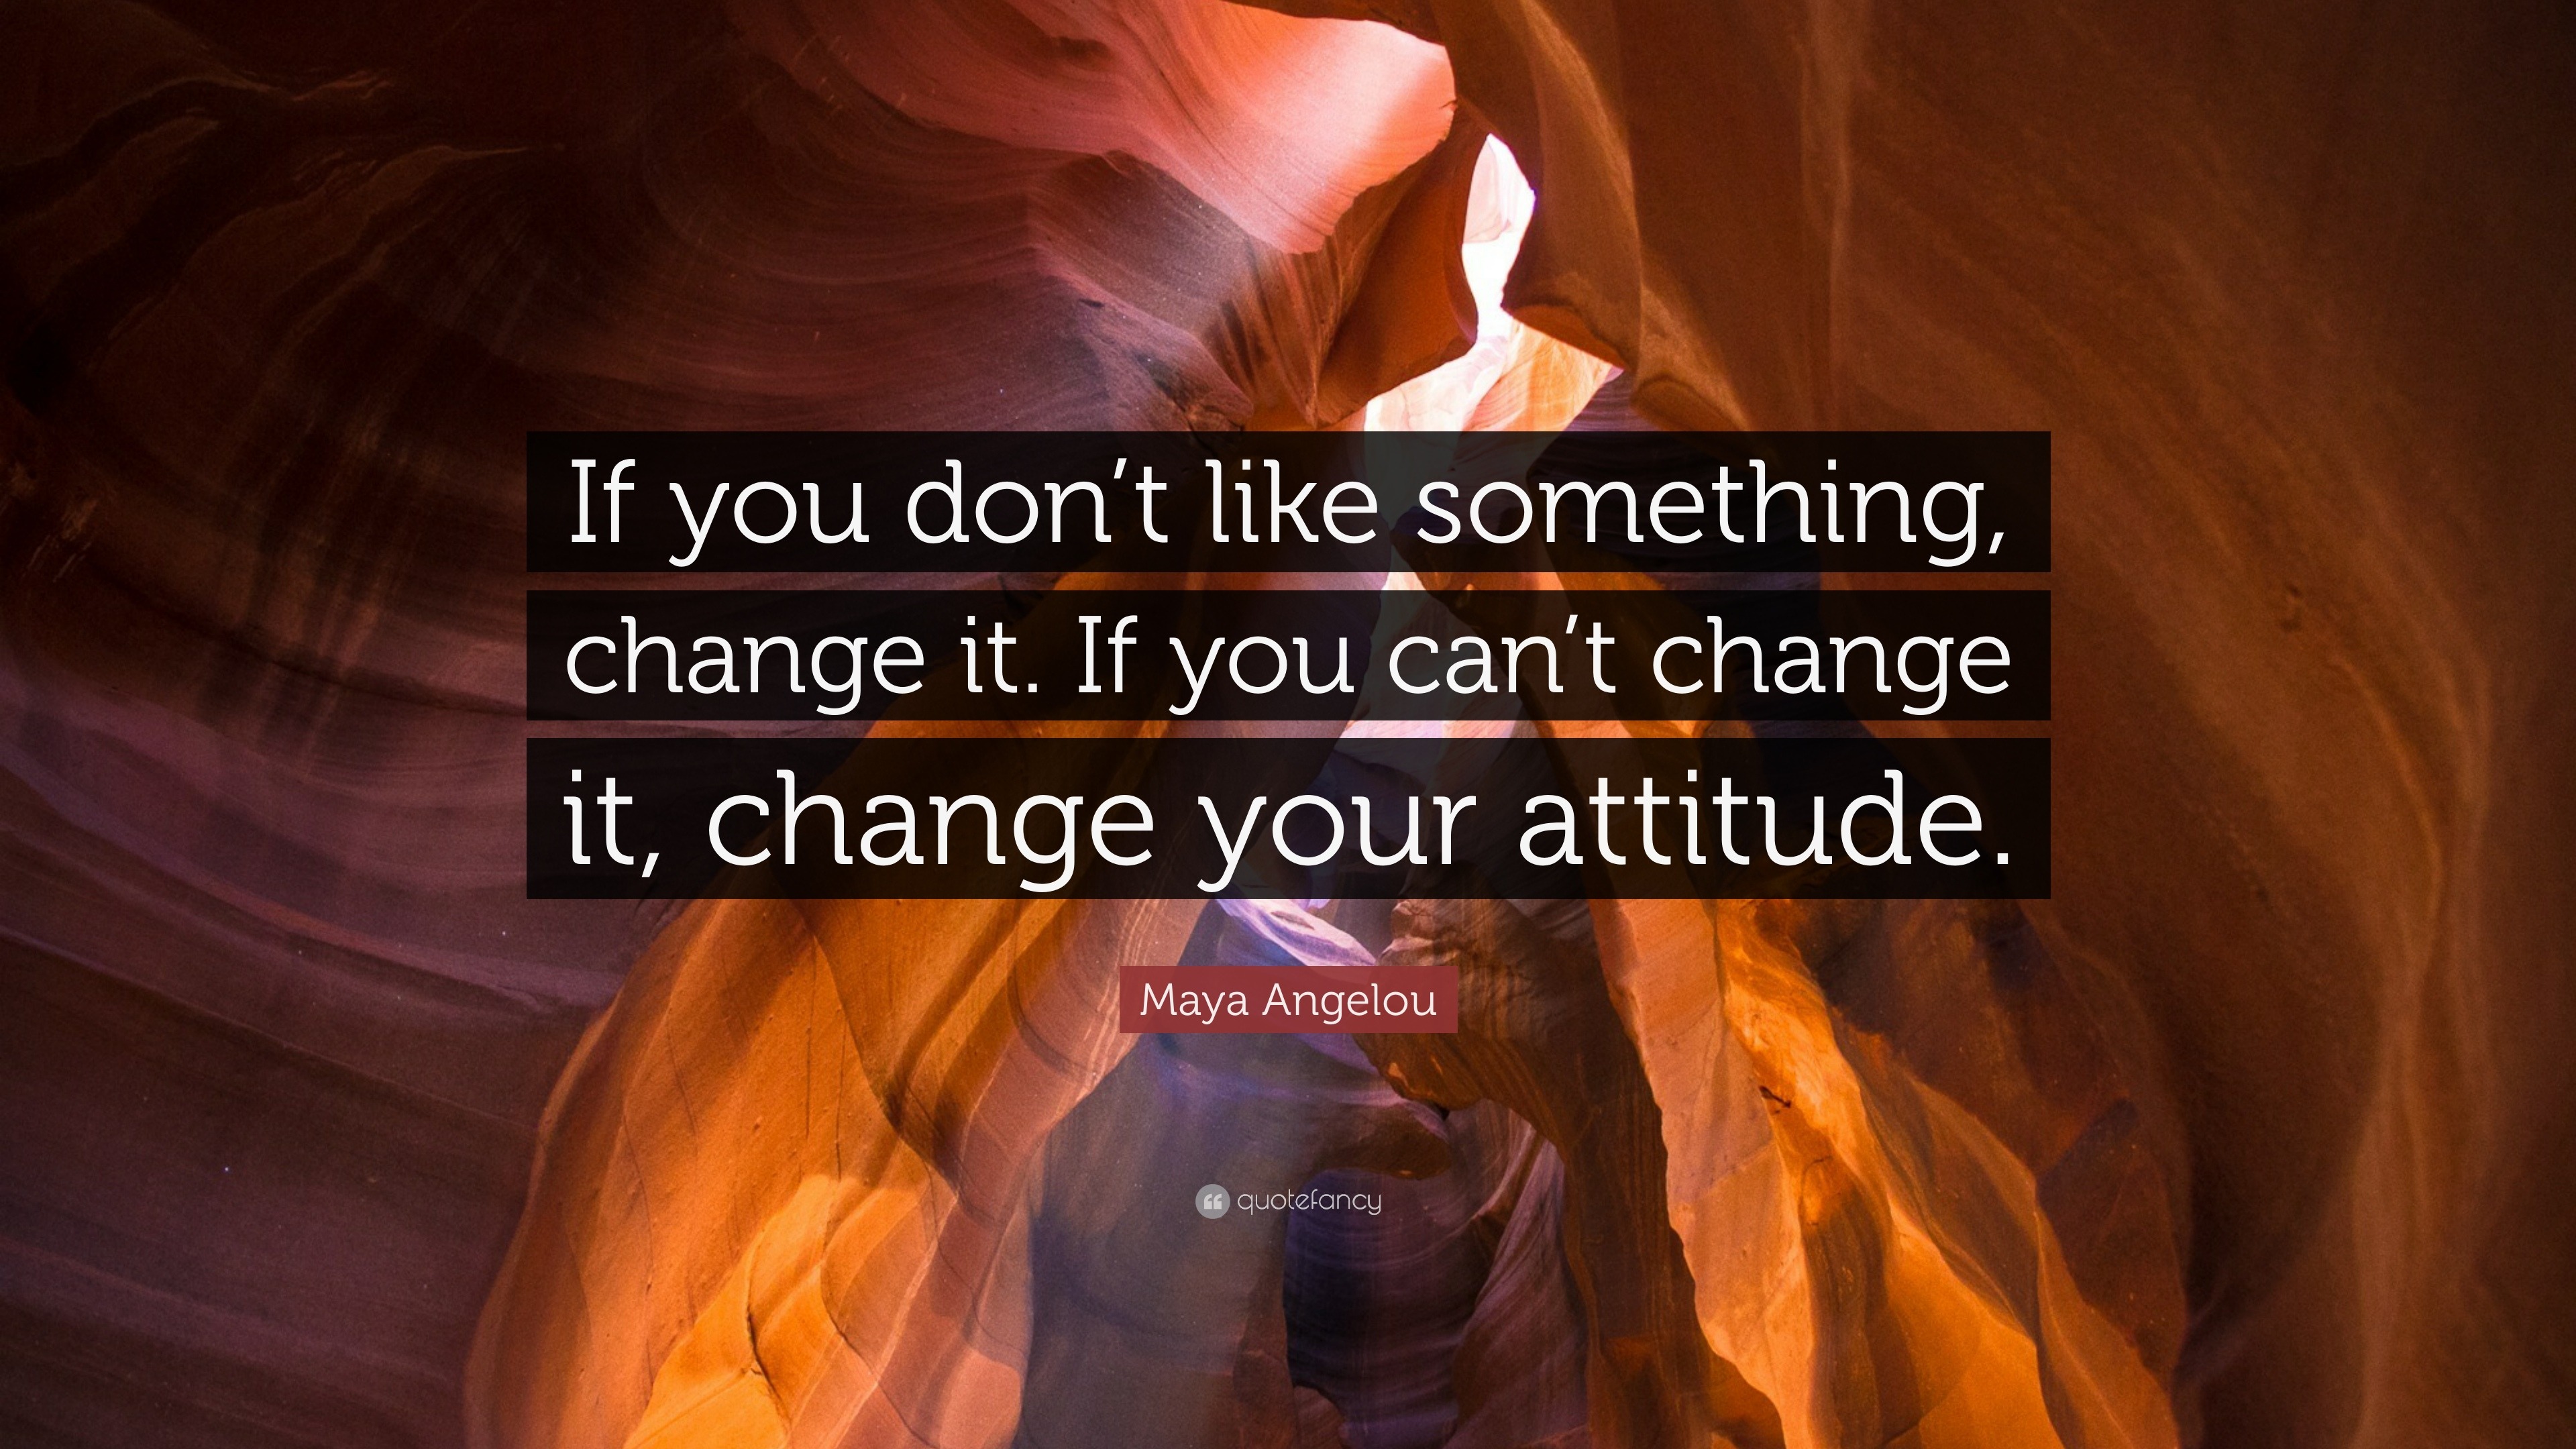 Maya Angelou quote: “If you don't like something, change it.